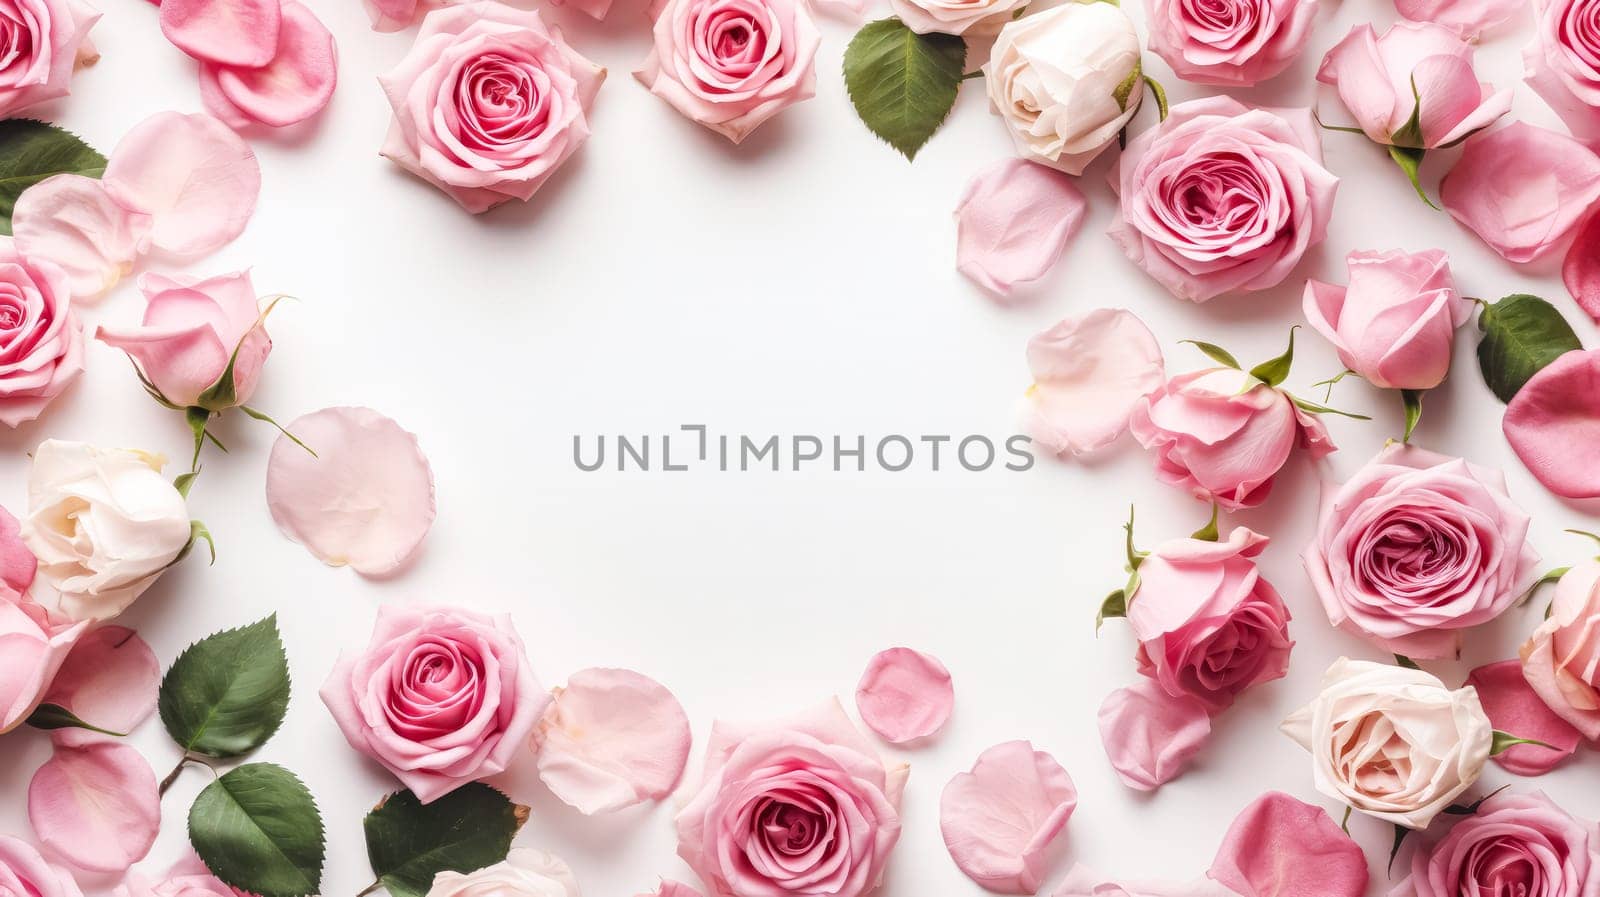 a delicate framework made of roses on a clean white background. by Alla_Morozova93